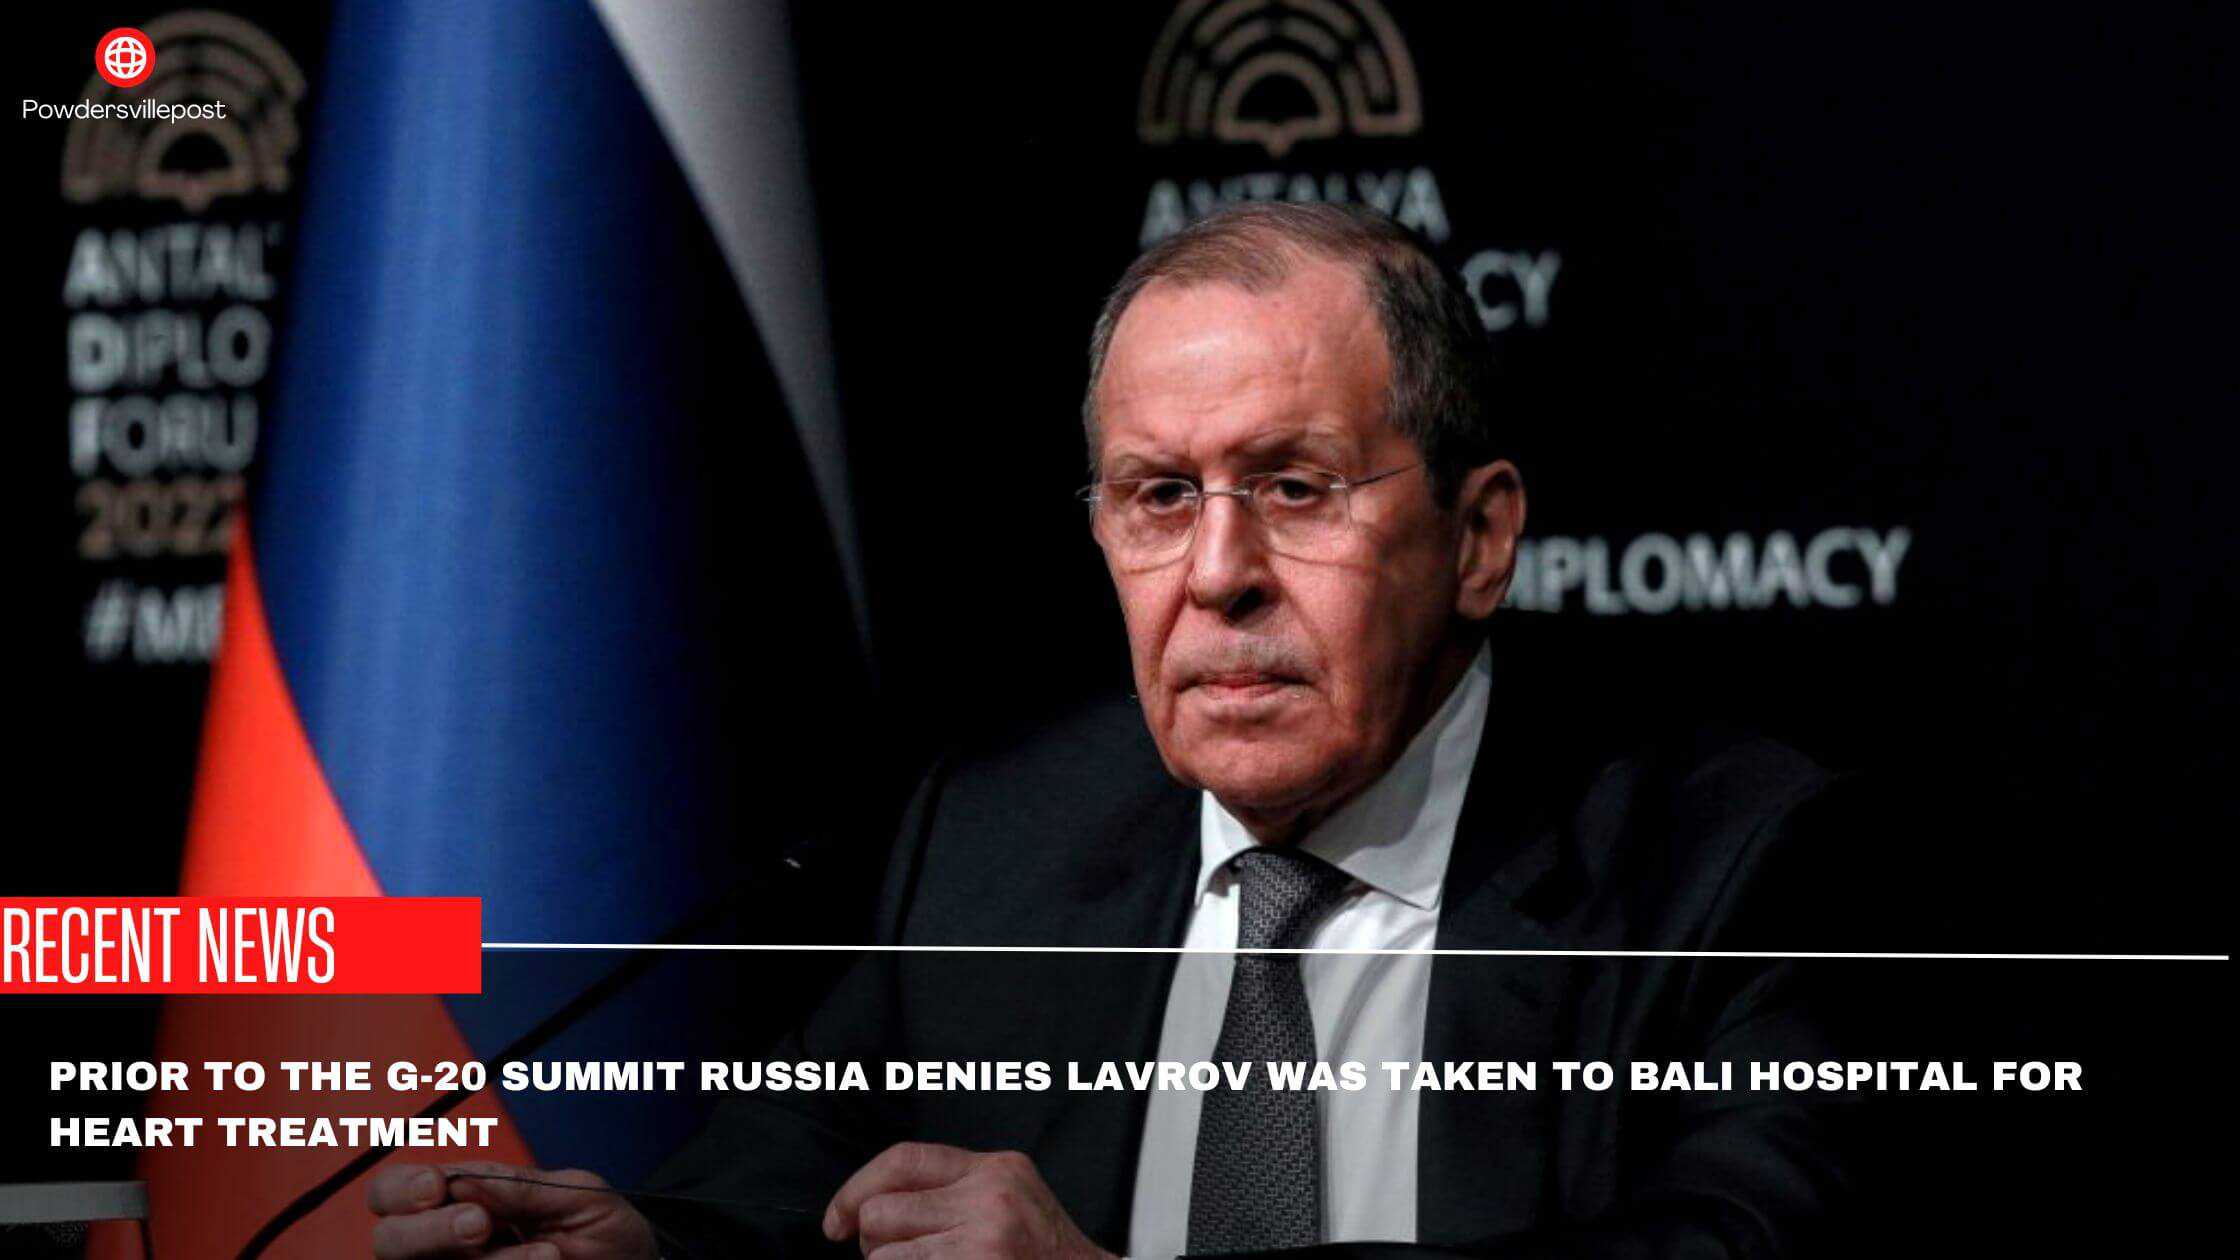 Prior To The G-20 Summit Russia Denies Lavrov Was Taken To Bali Hospital For Heart Treatment